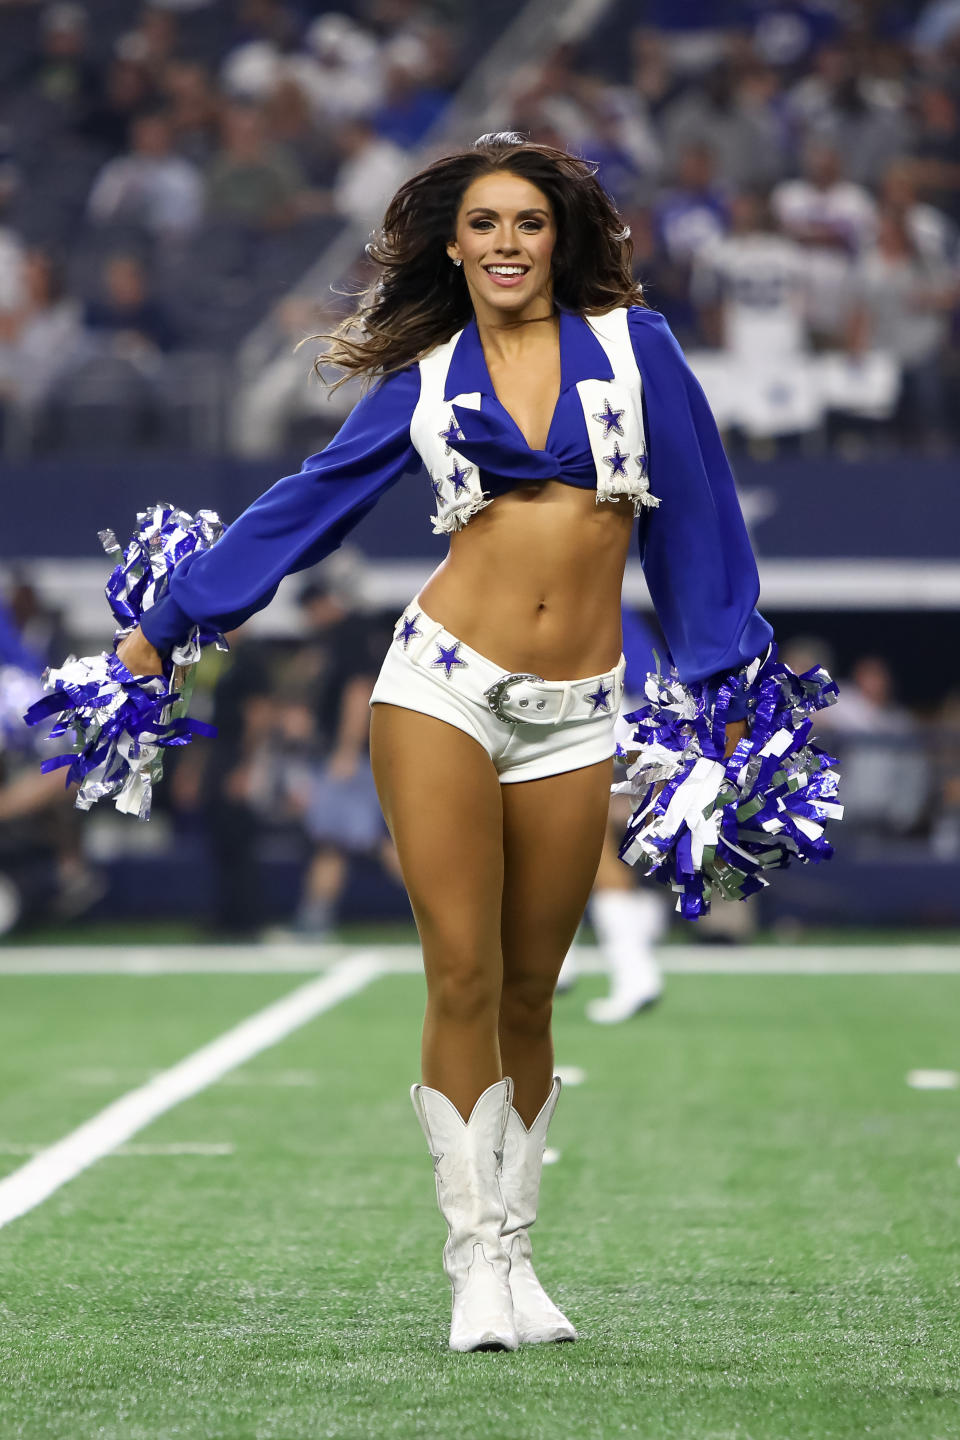 <p>The Dallas Cowboys Cheerleaders perform during to the Sunday Night NFL game between the Dallas Cowboys and New York Giants on September 10, 2017 at AT&T Stadium in Arlington, TX. (Photo by Andrew Dieb/Icon Sportswire via Getty Images) </p>